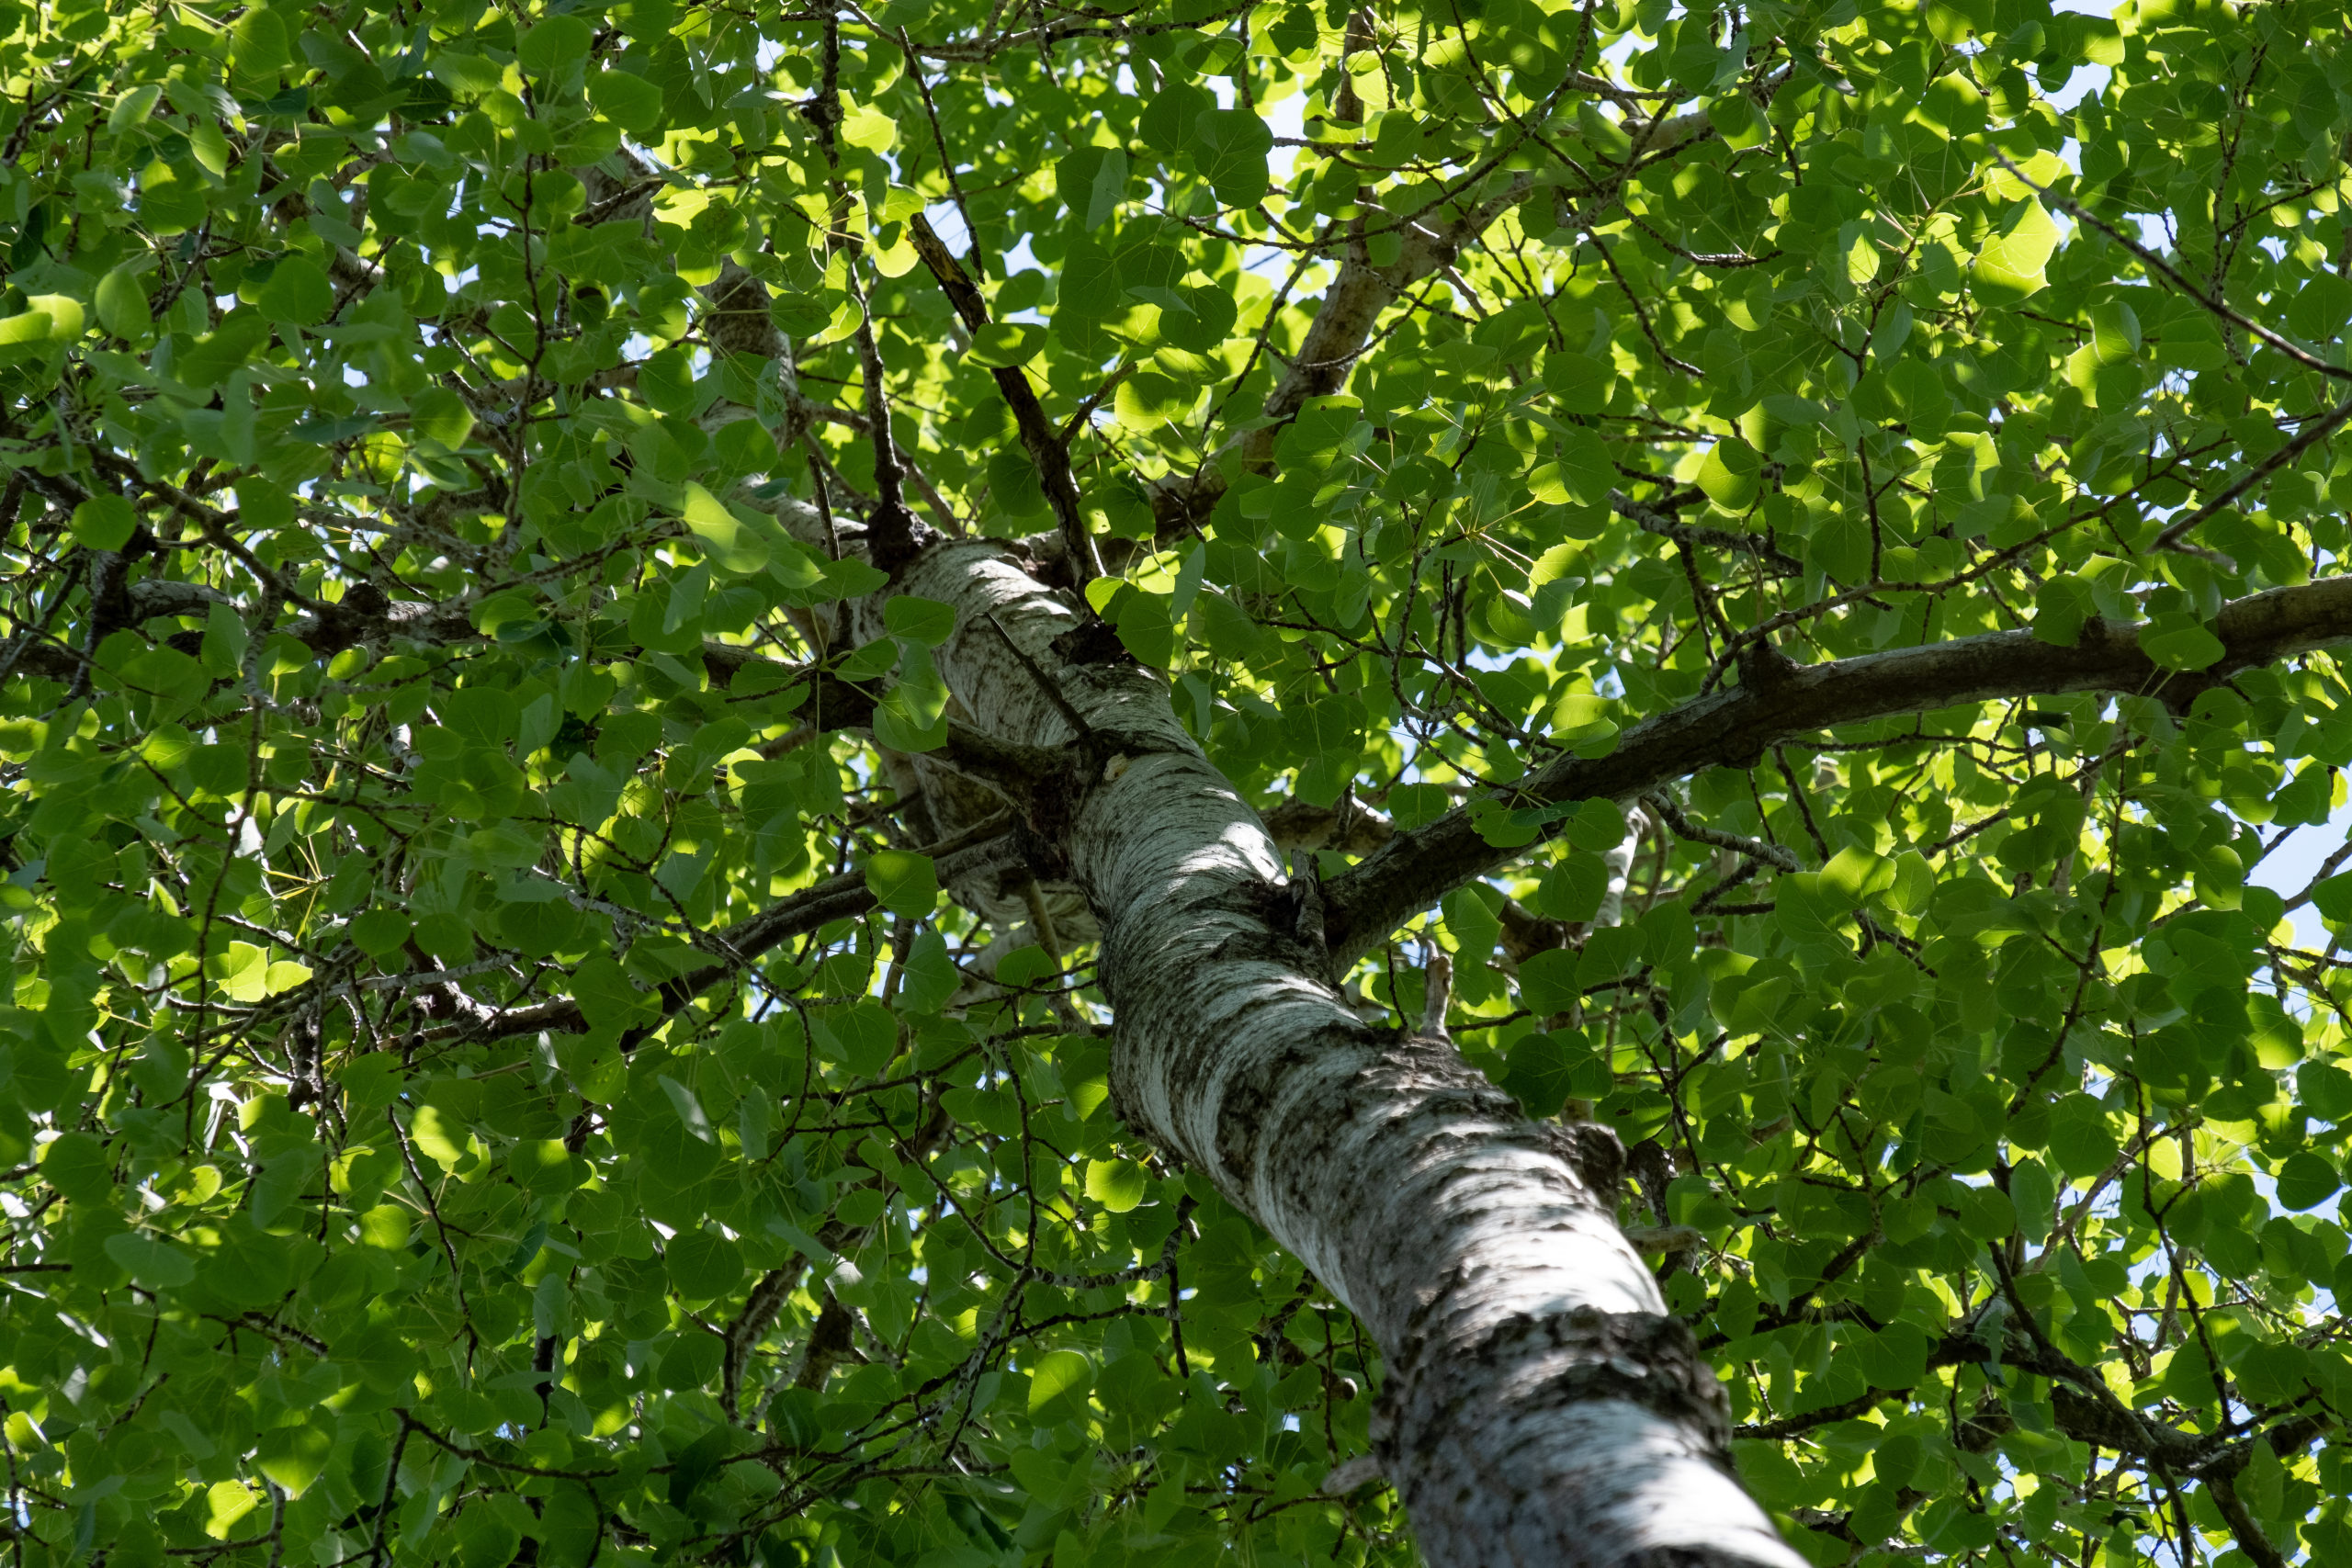 colour photo looking up into a tall poplar tree